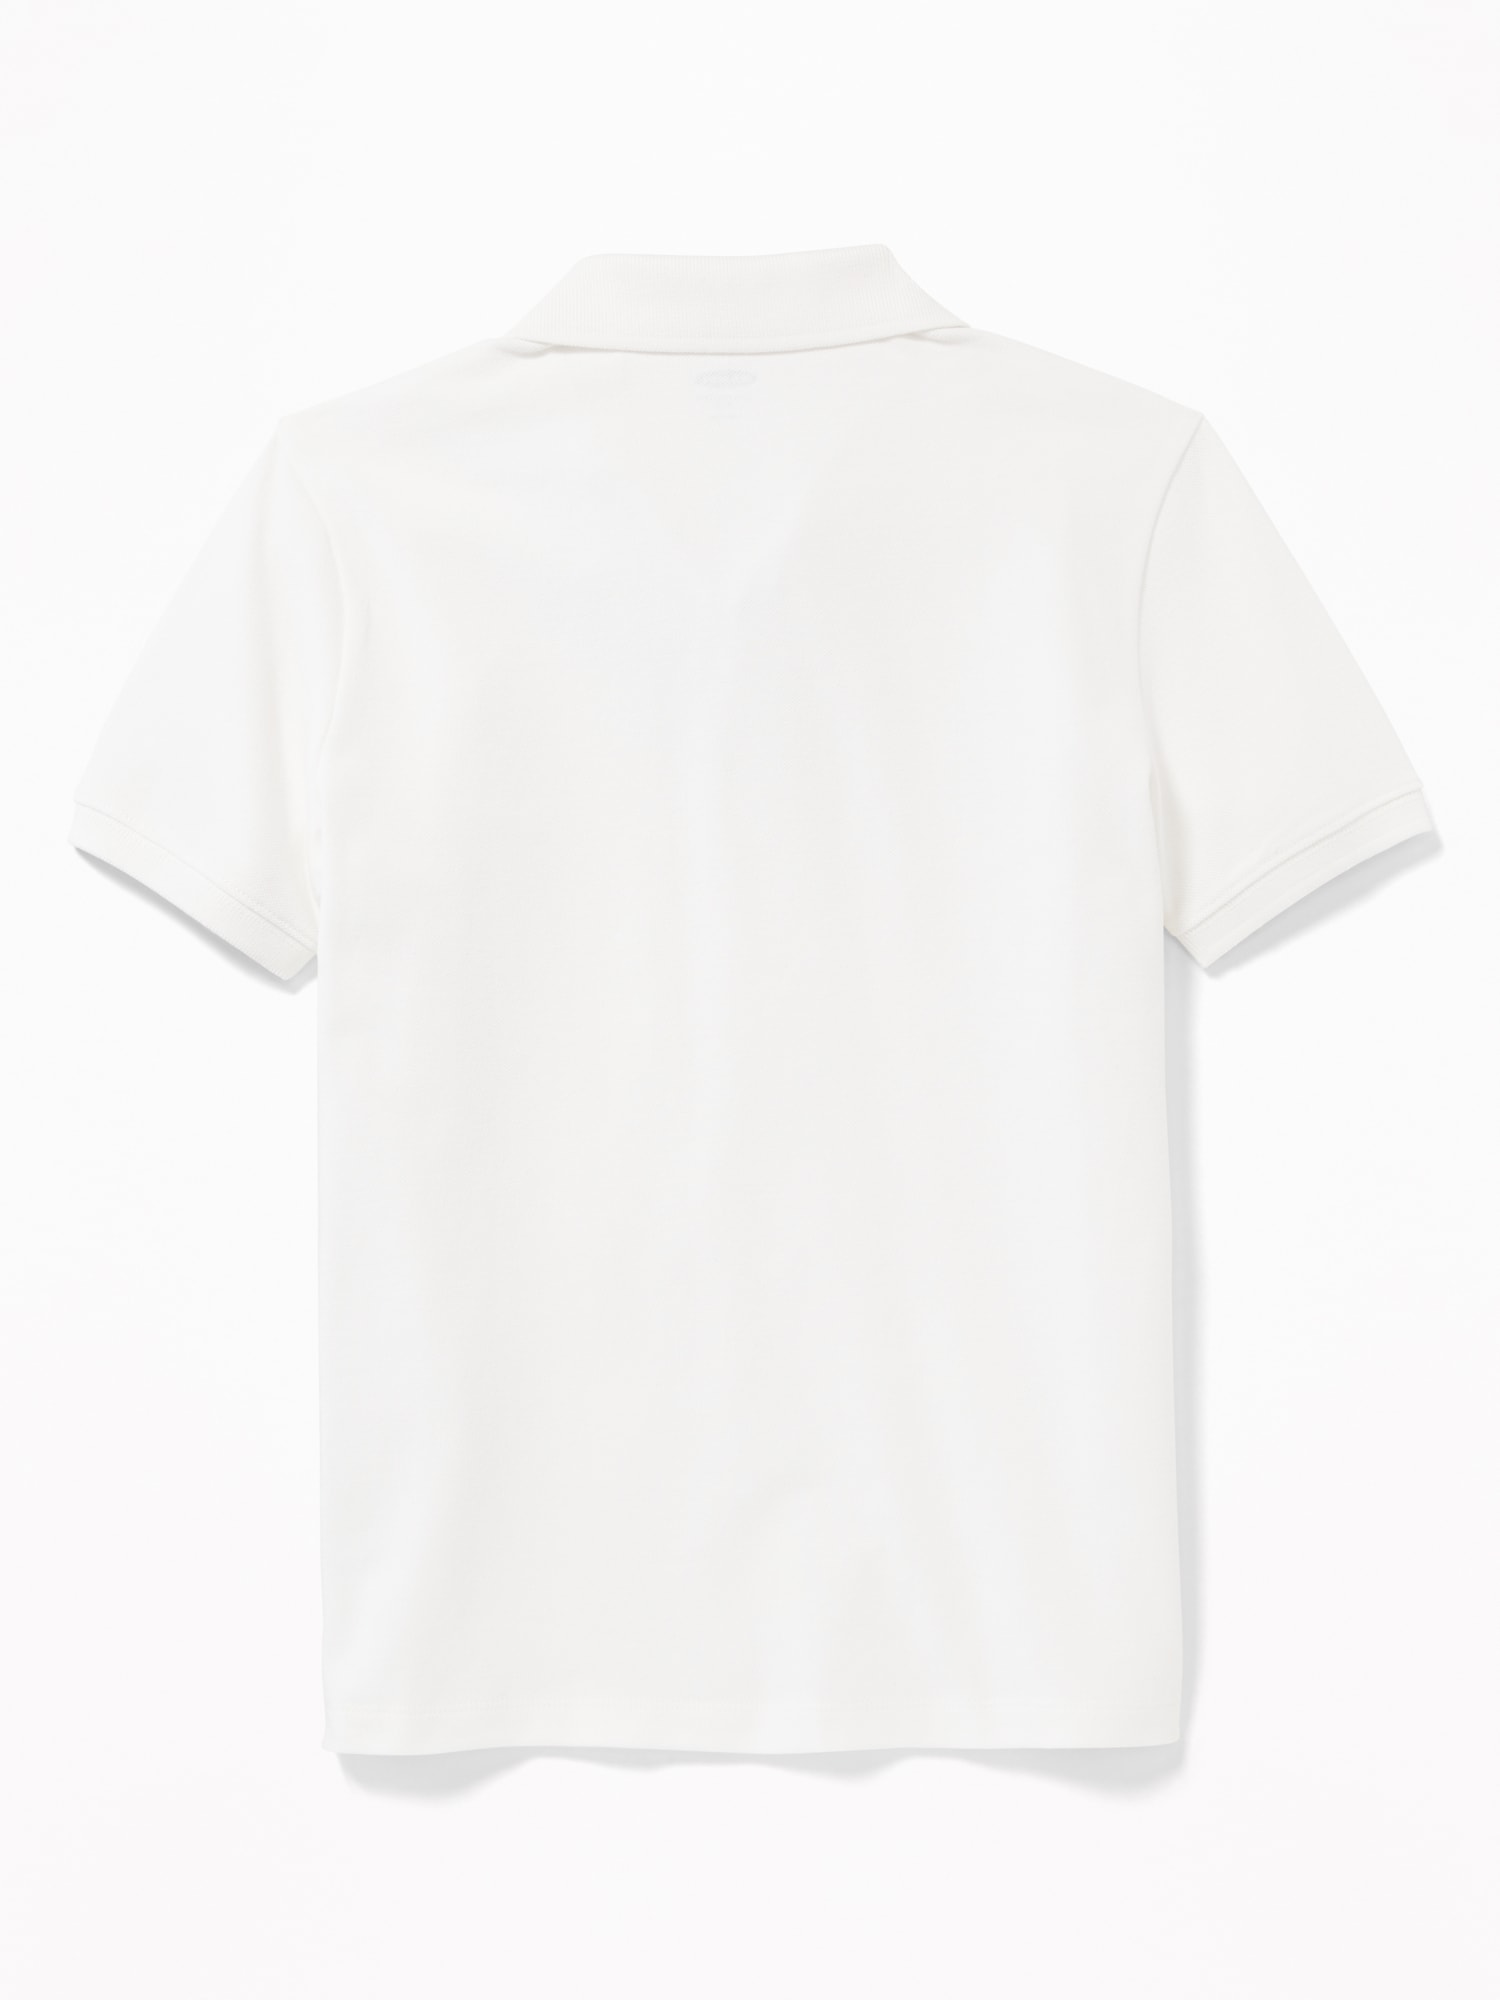 Uniform Stain-Resistant Built-In Flex Pique Polo for Boys | Old Navy